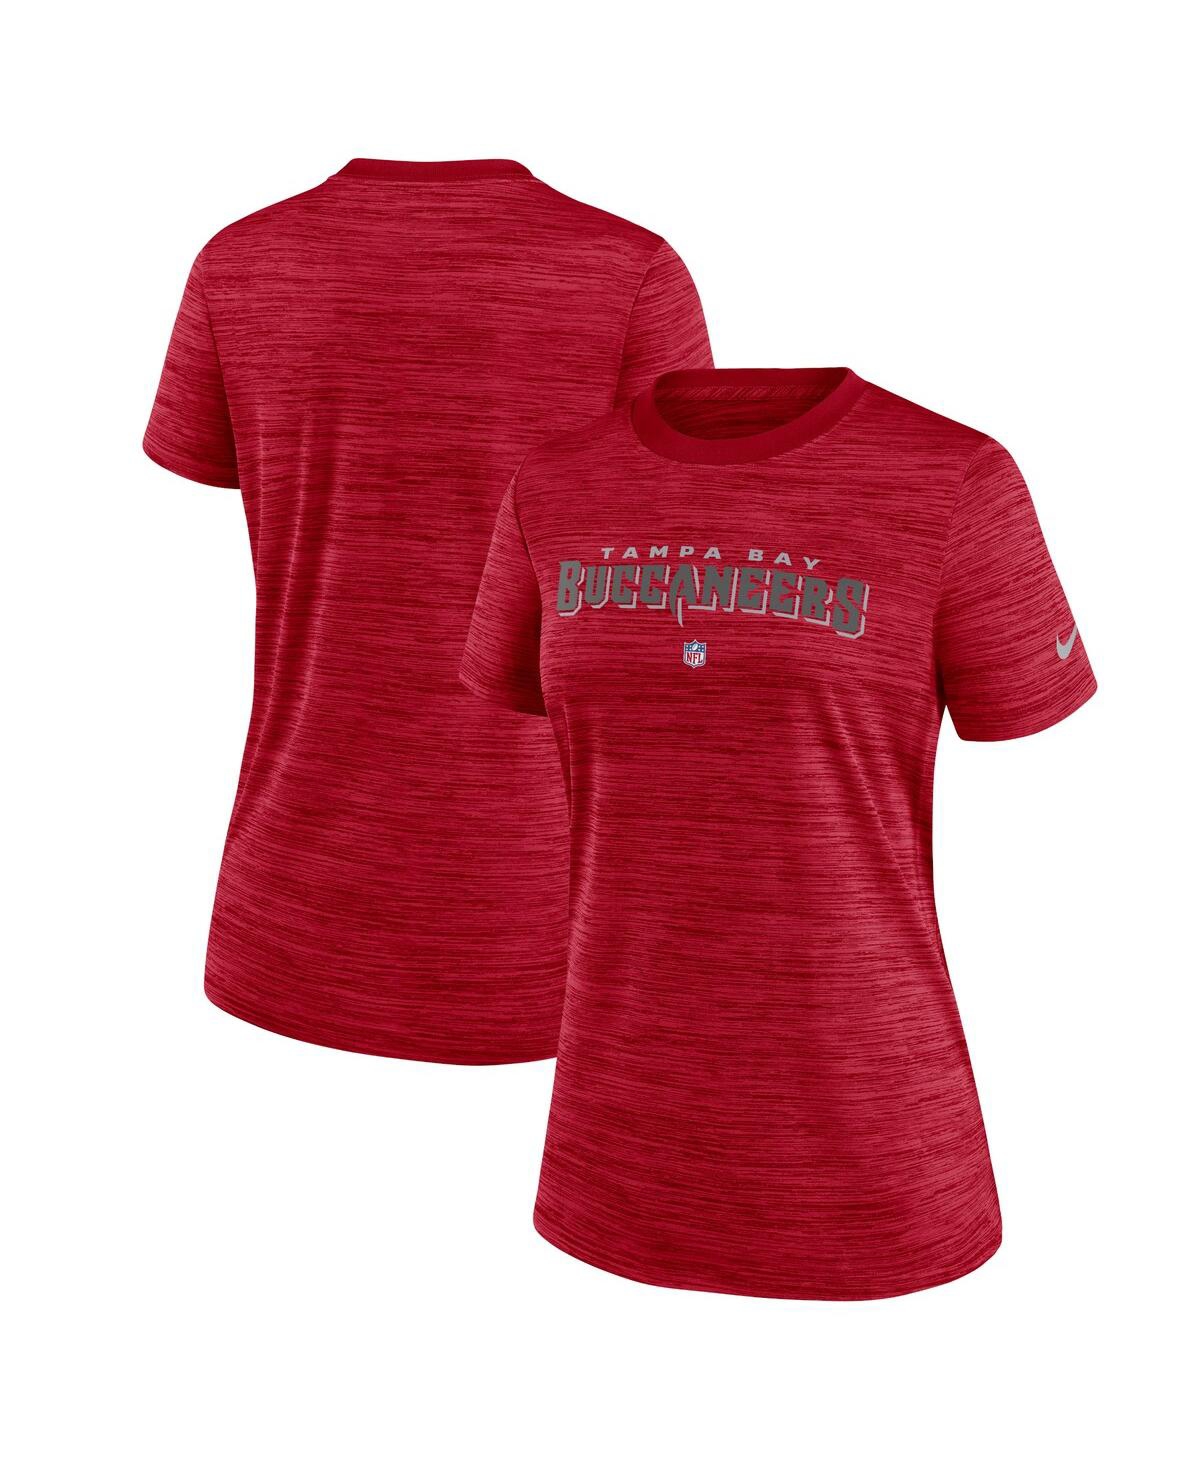 Nike Women's Dri-fit Sideline Velocity (nfl Tampa Bay Buccaneers) T-shirt In Red